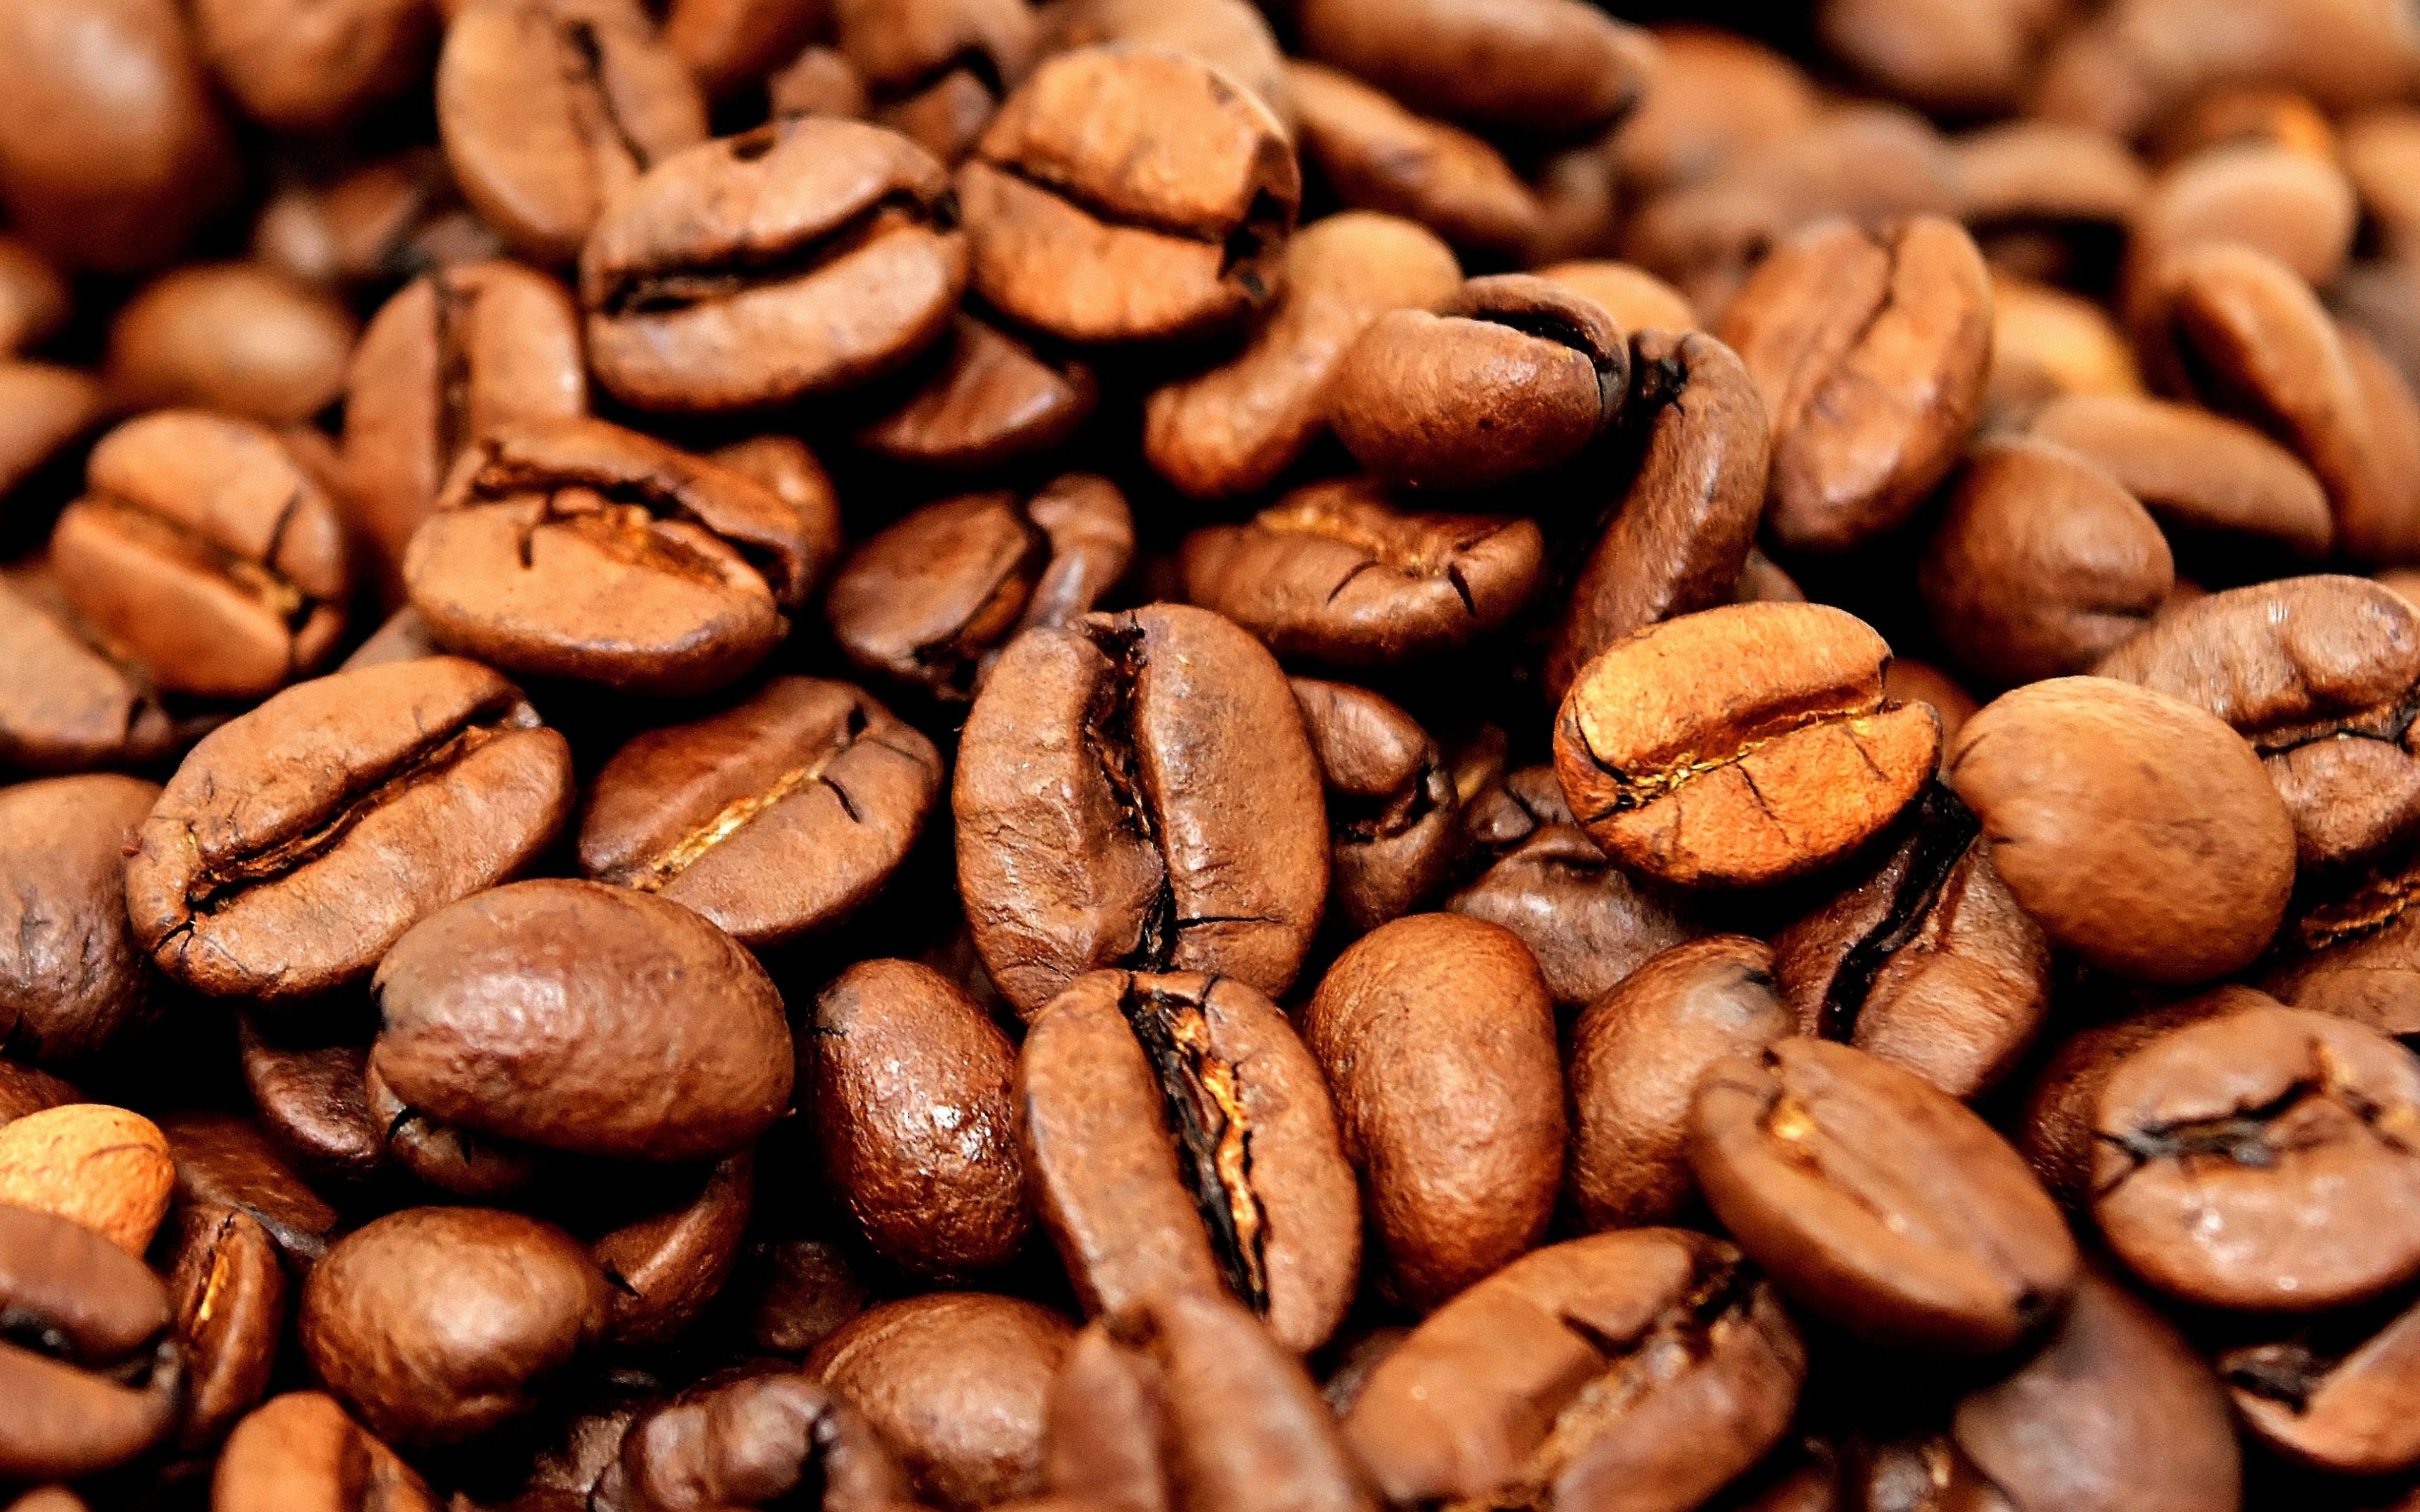 Download 3840x2400 wallpaper coffee beans, close up, 4k, ultra HD 16: widescreen, 3840x2400 HD image, background, 3084